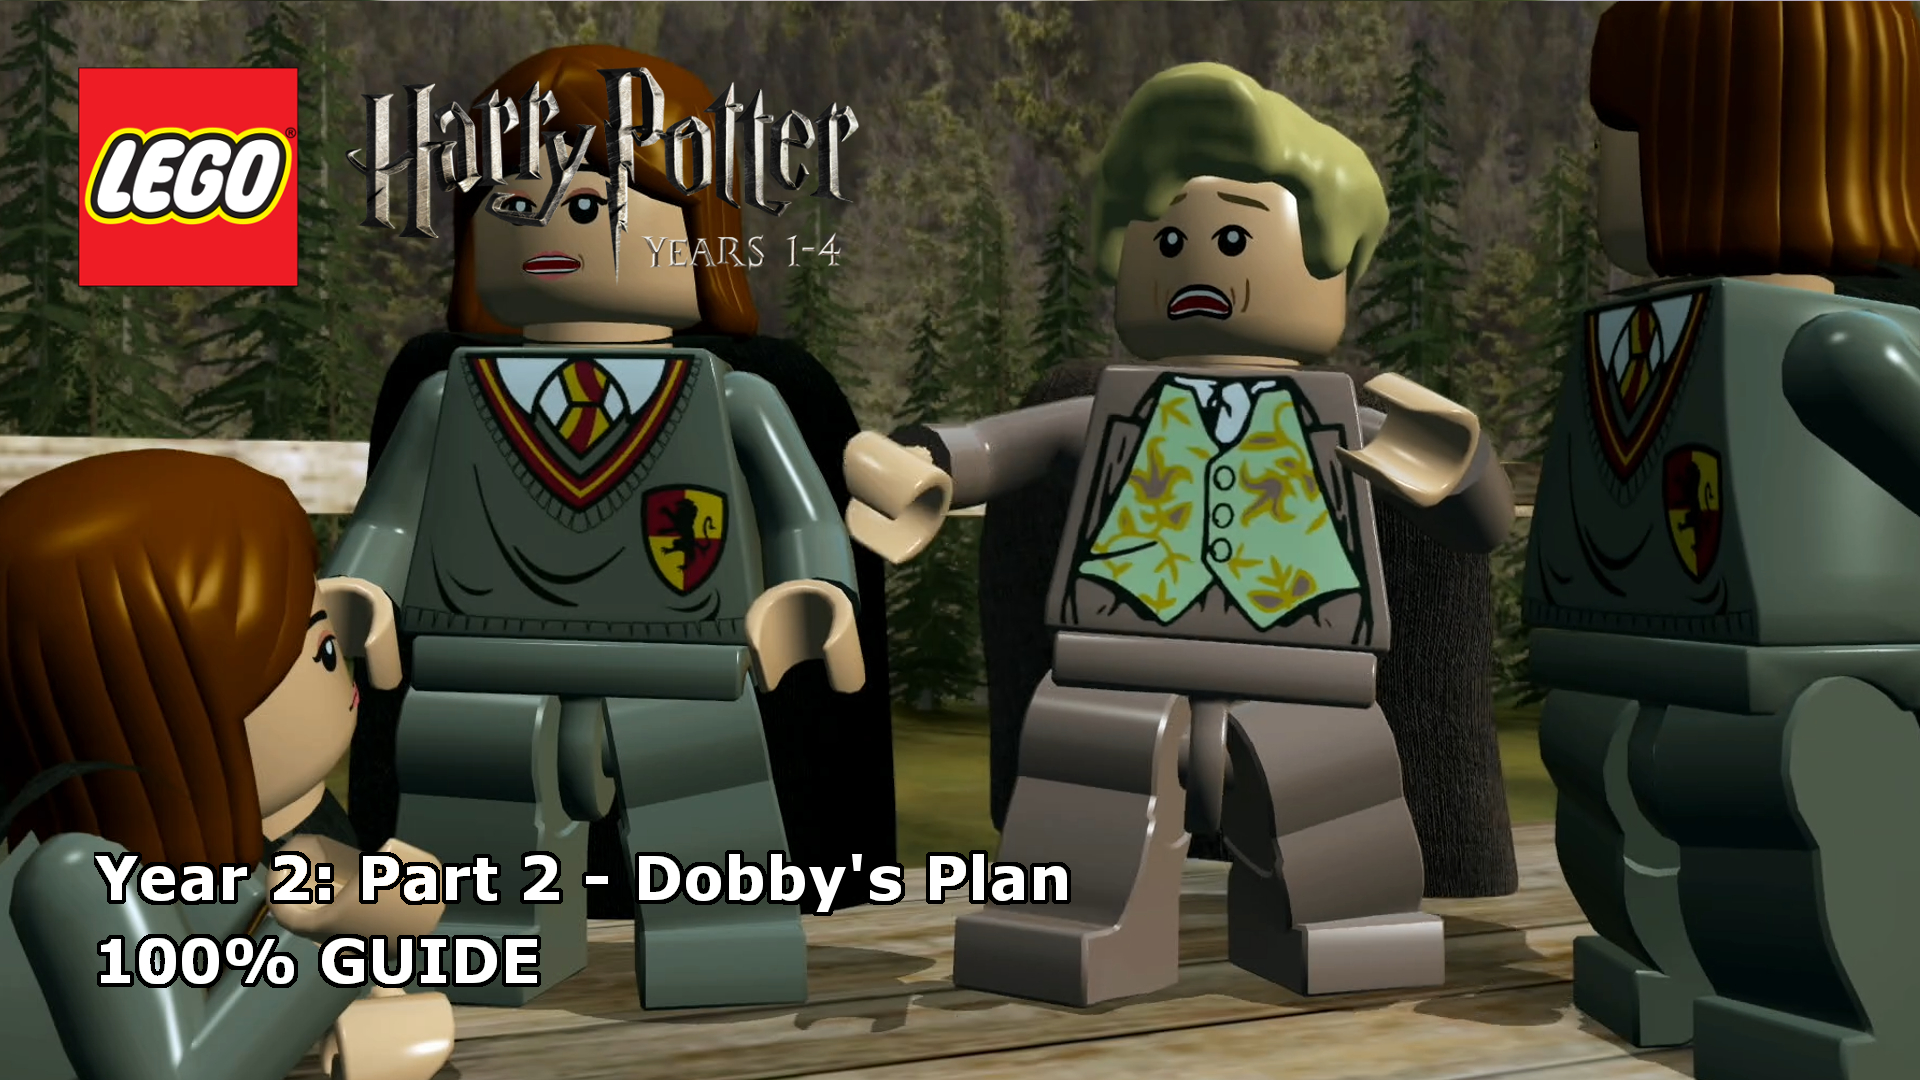 Completed Lego Harry Potter years 1-4! Now moving on to LHP years 5-7 to  complete the collection. Even without voice actors this is one of the top  tier lego games imo. : r/legogaming